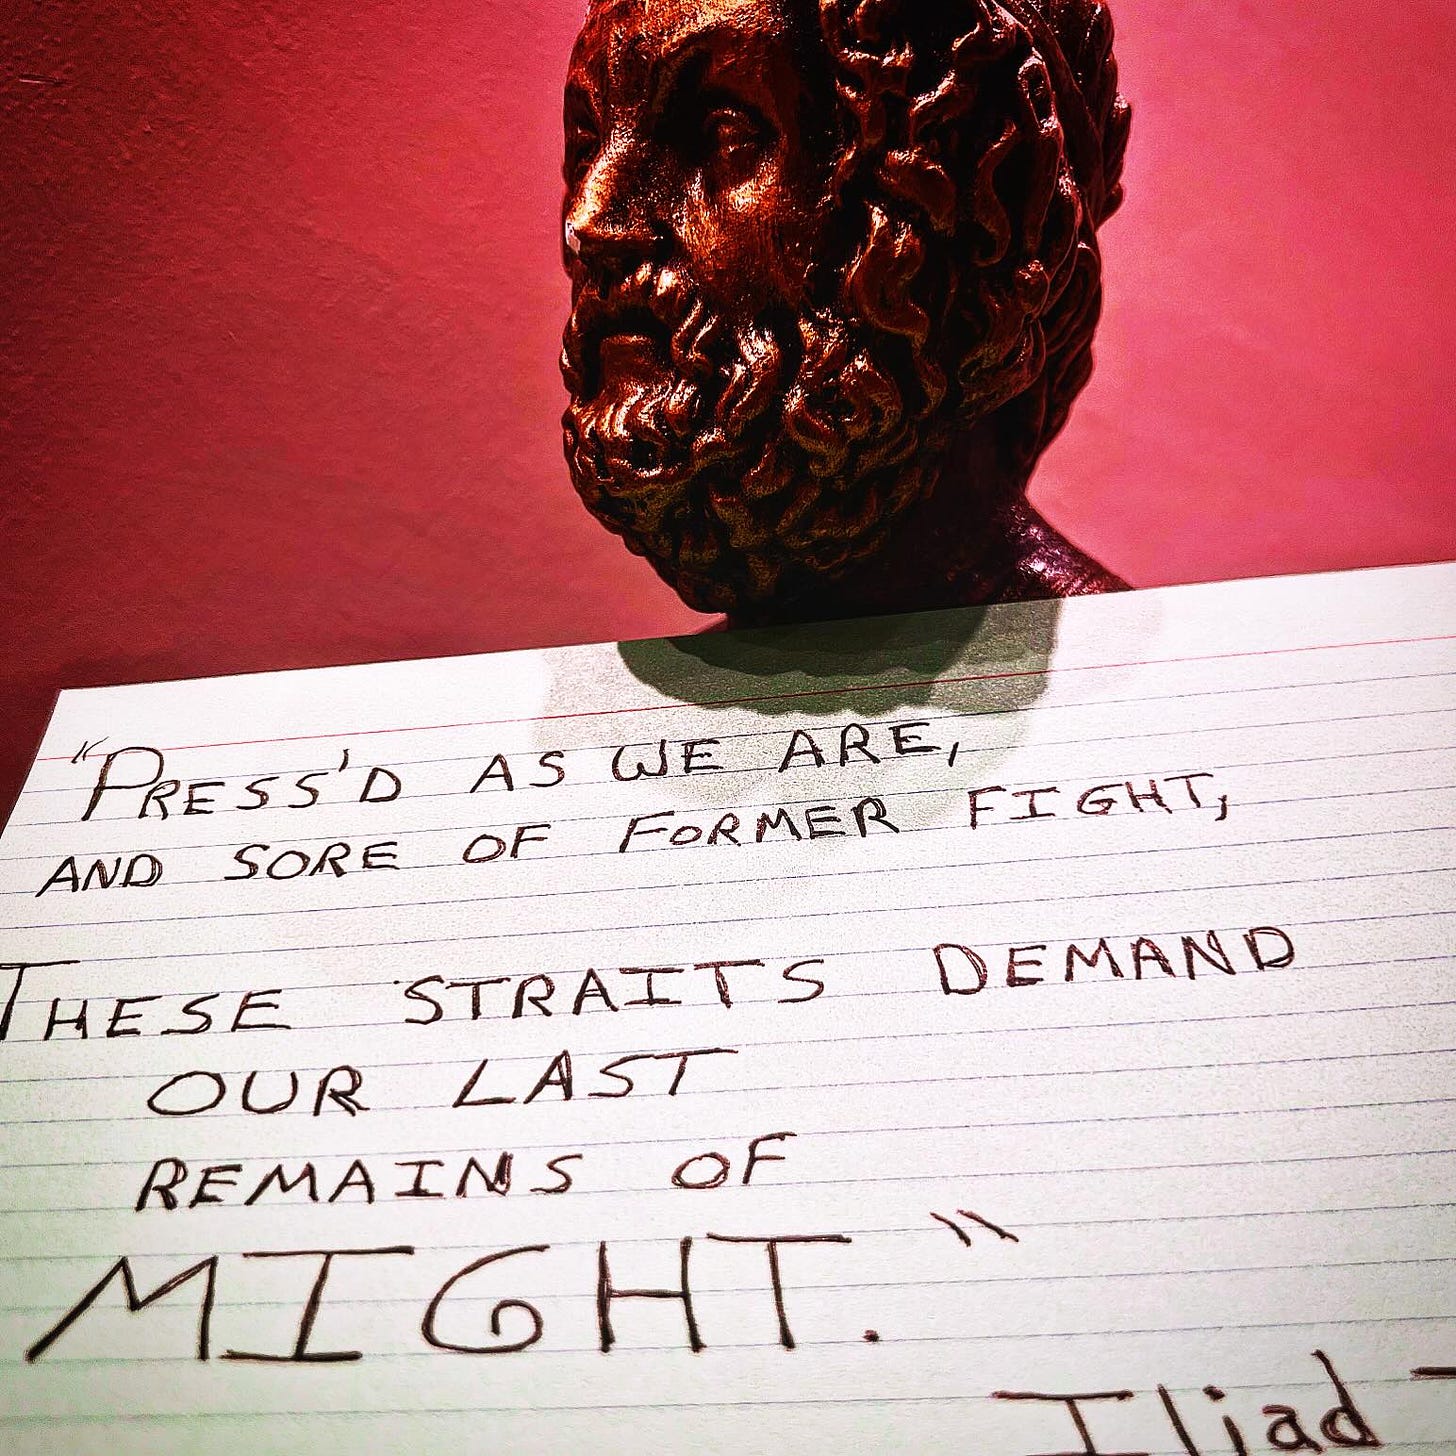 “Press'd as we are, and sore of former fight, These straits demand our last remains of might.” -Iliad